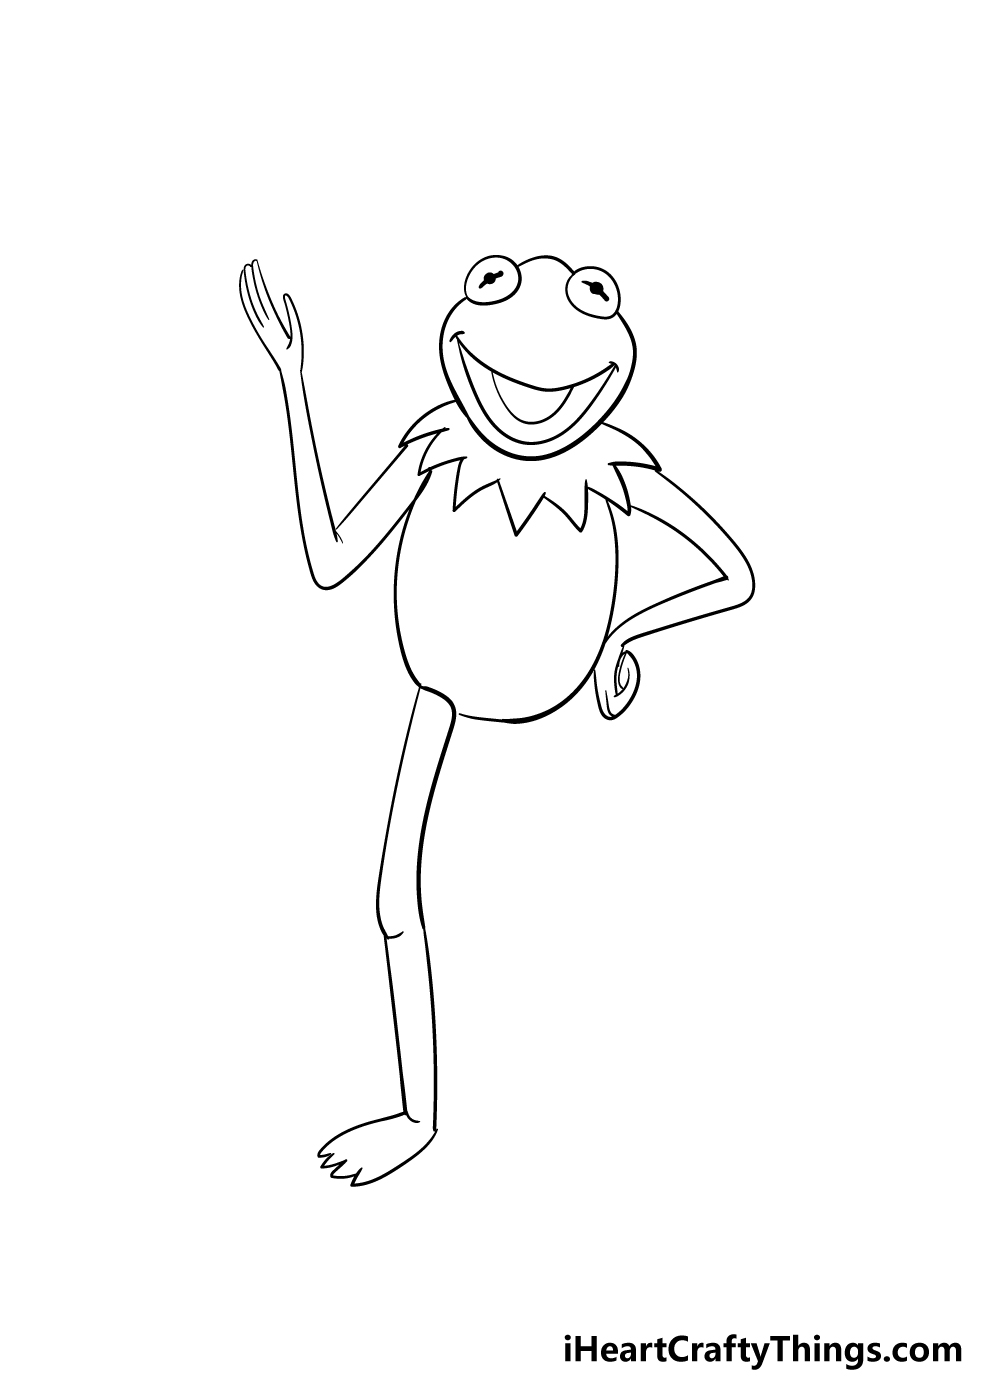 drawing Kermit the frog step 6